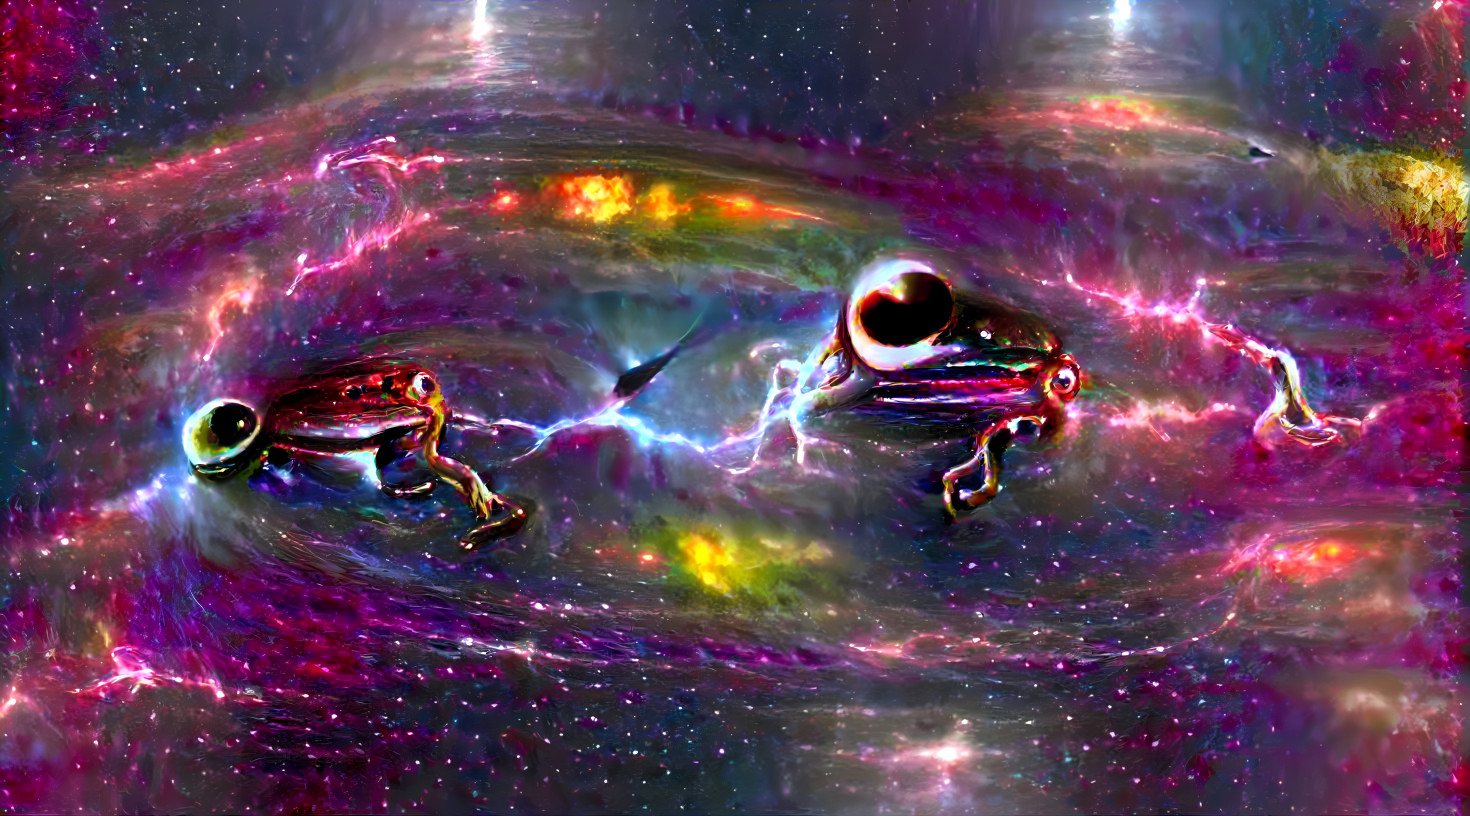 frogs play hippies in electric space